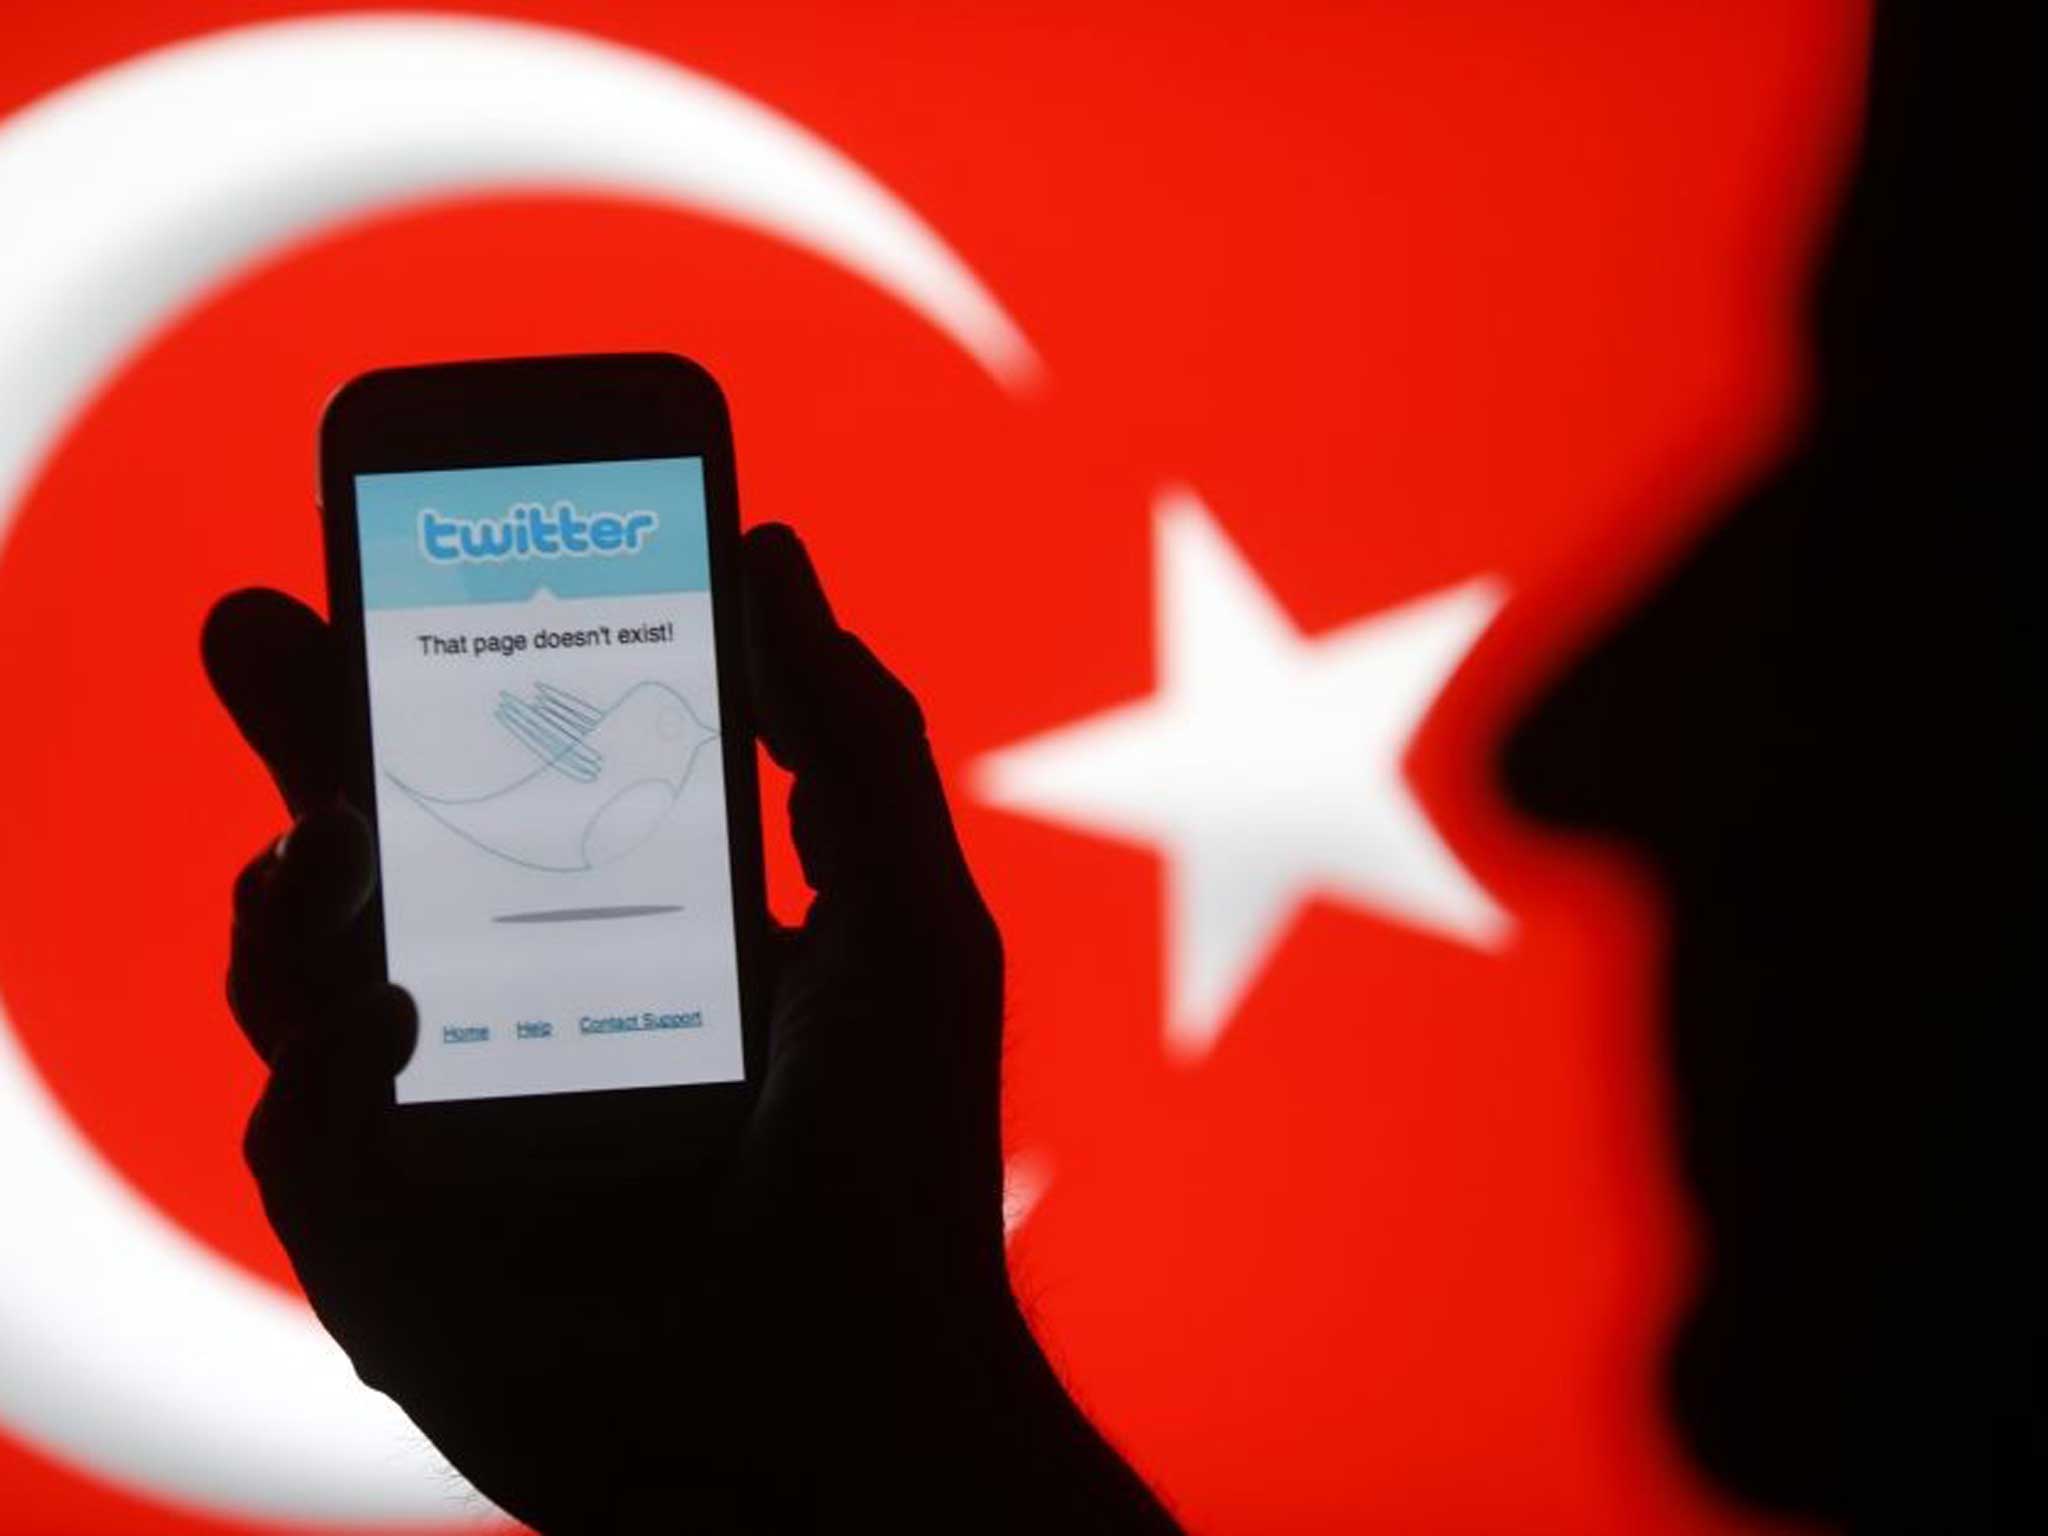 Twitter’s error message comes up – with the Turkish flag